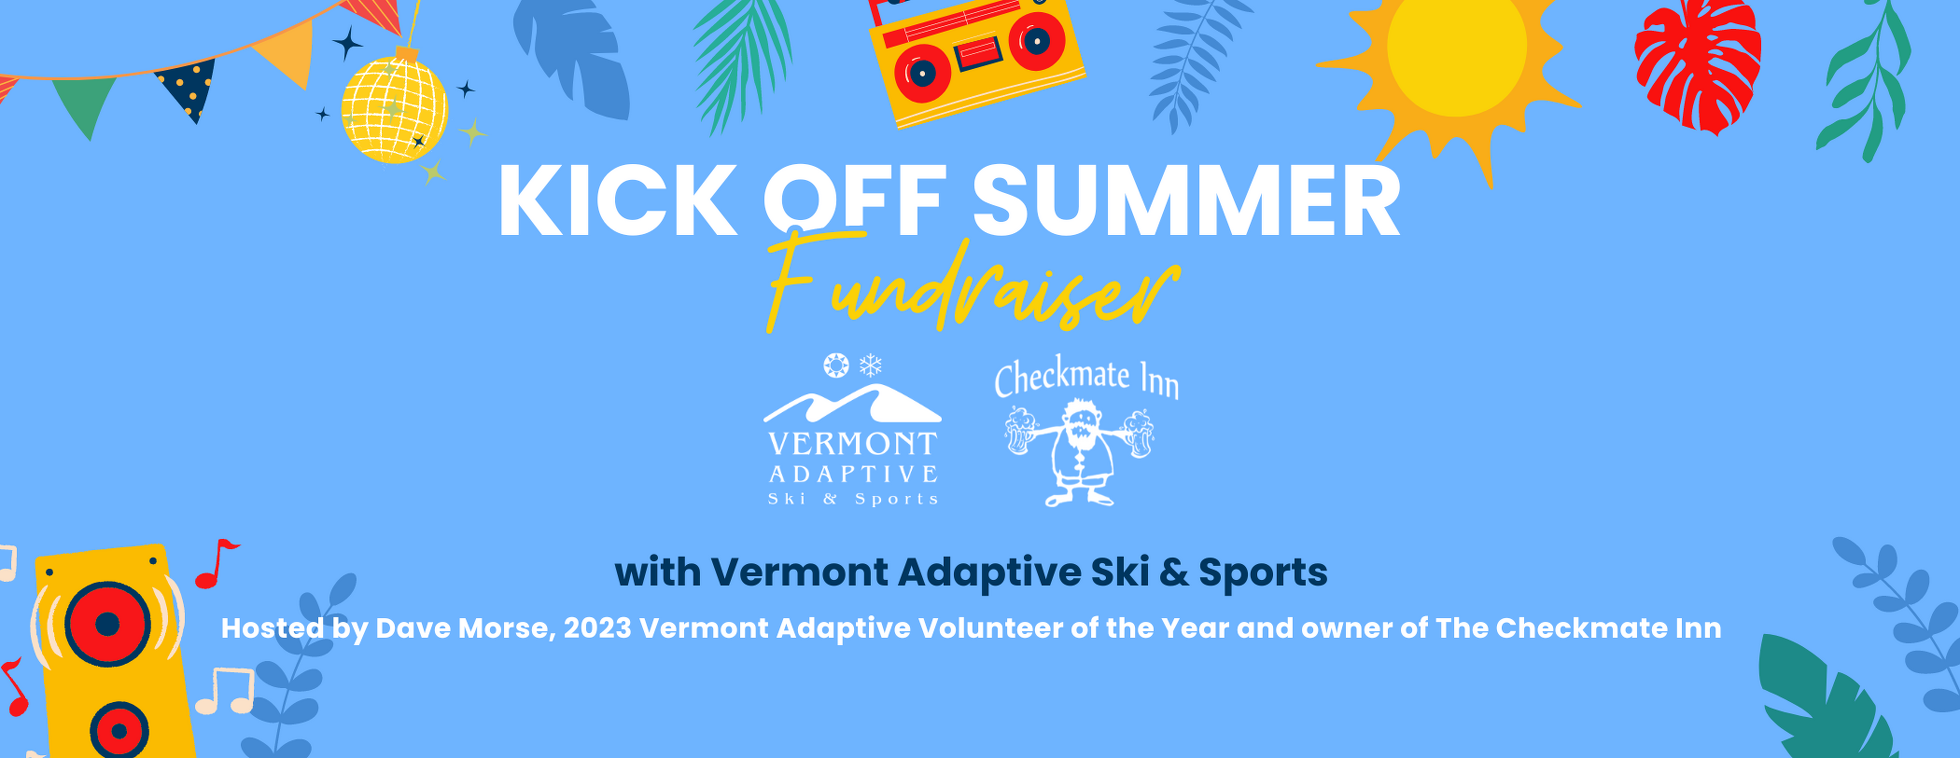 Vermont Adaptive Summer Kick-off Fundraiser at The Checkmate Inn